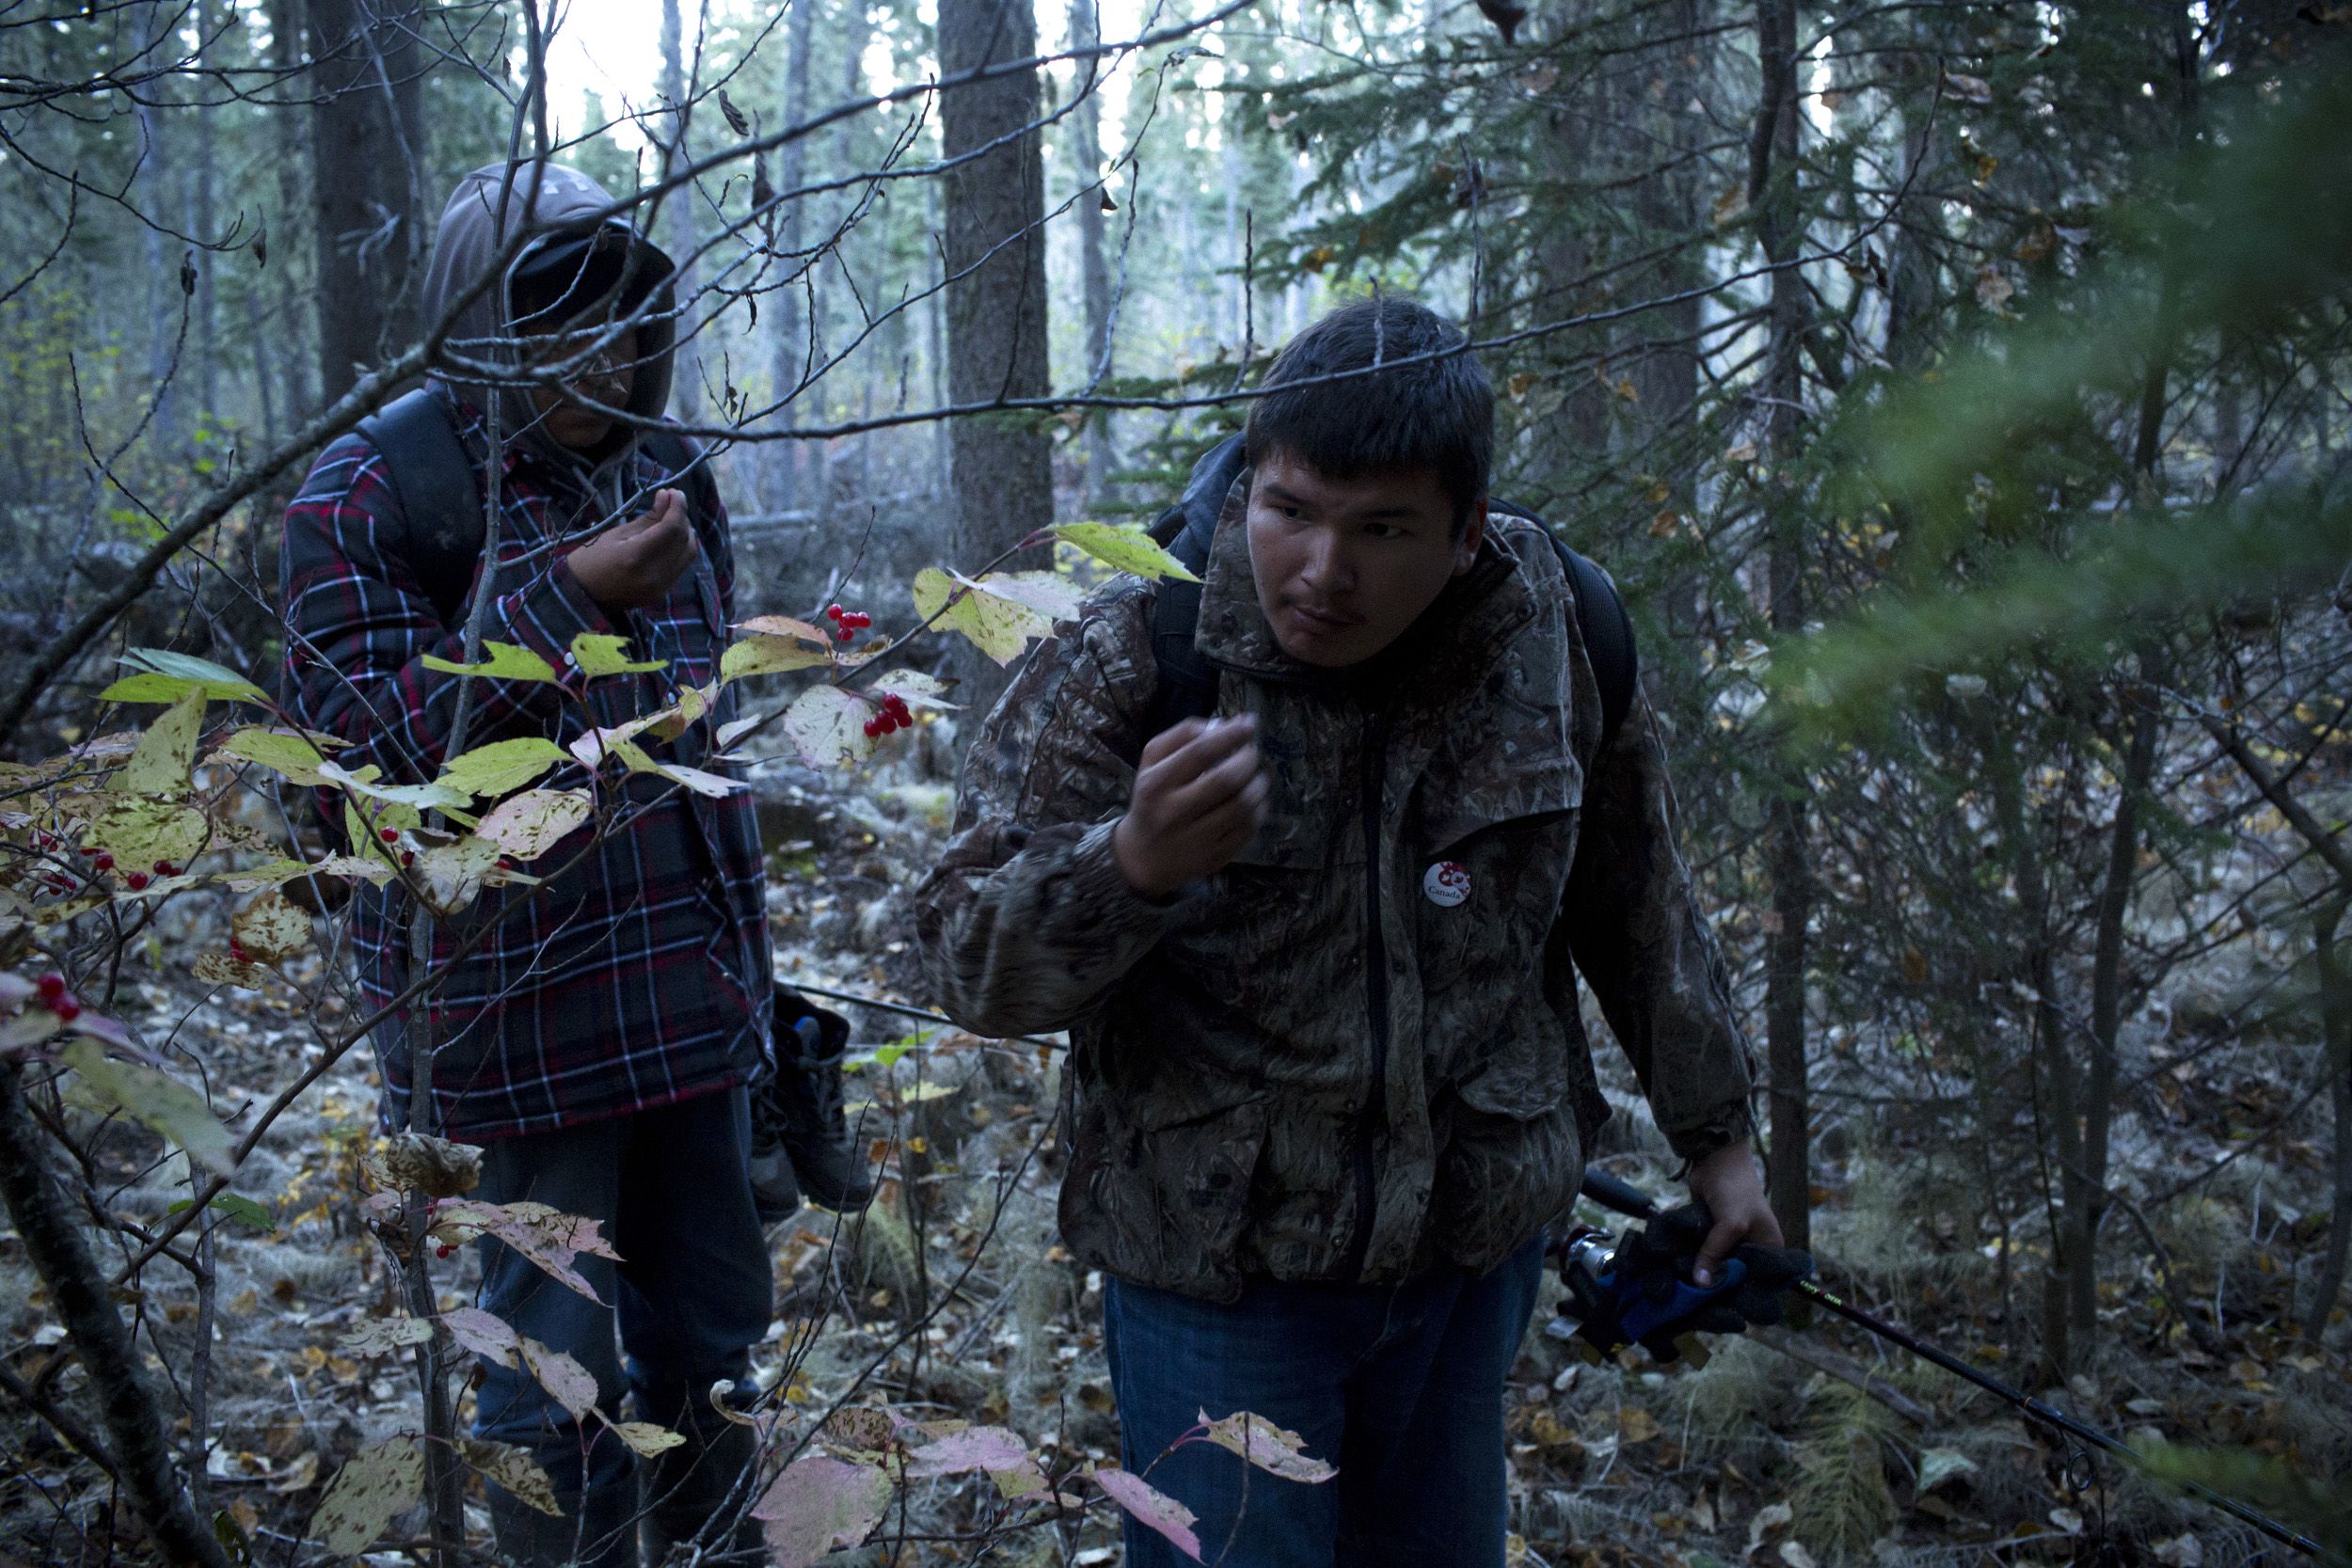 Lucas Shisheesh, 21, right, and Adrian Hookimaw, 19, pick wild berries while hiking from a fishing spot on the banks of the Attawapiskat River. Shisheesh spends a lot of time learning from his father about the wilderness. Image by David Maurice Smith/Oculi. Canada, 2016.